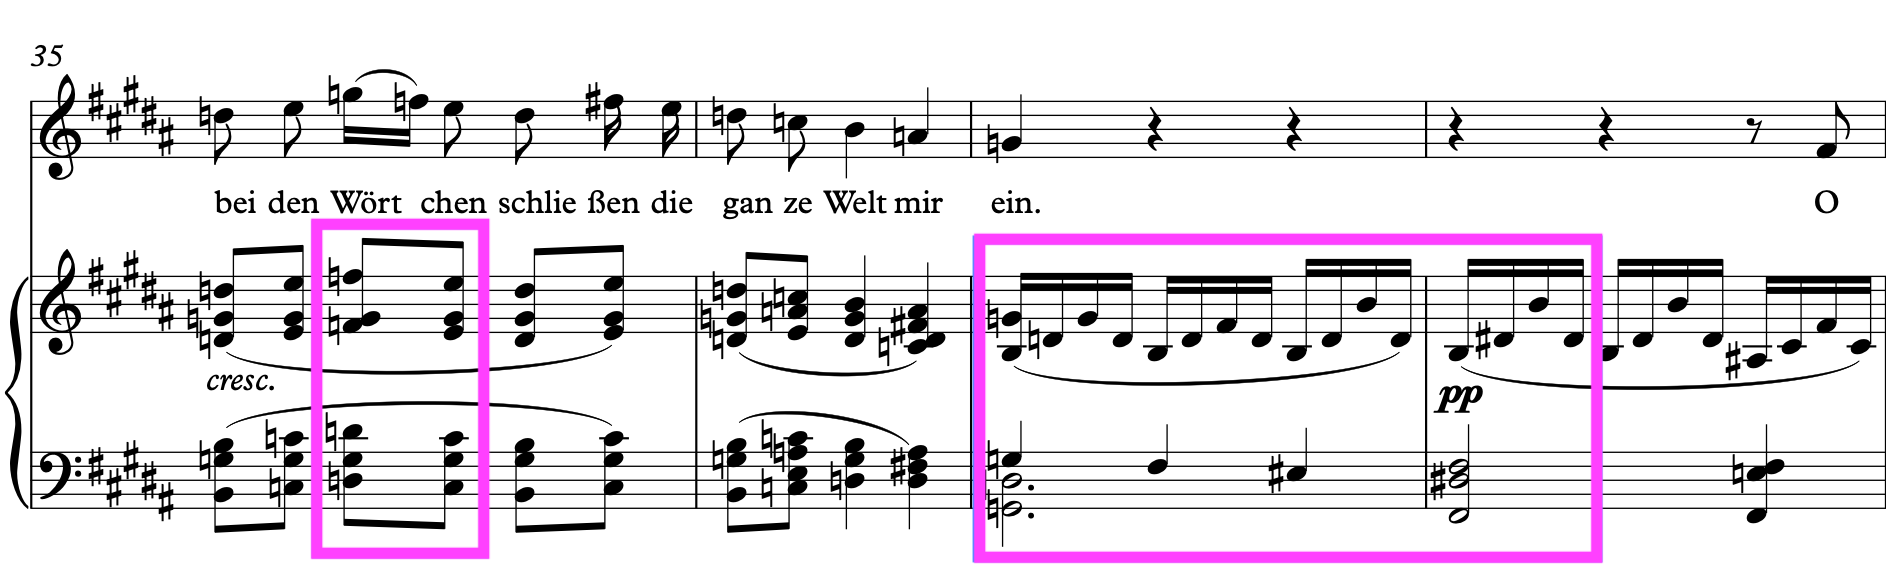 Franz Schubert: Der Neugierige mm.35-46. The first marked area features the second inversion of the secondary dominant seventh chord on G resolving to the subdominant C in the key of G major. The second marked area features the German 6th chord, with the F respelled as E# resolving to the cadential 6-4 chord in B major.